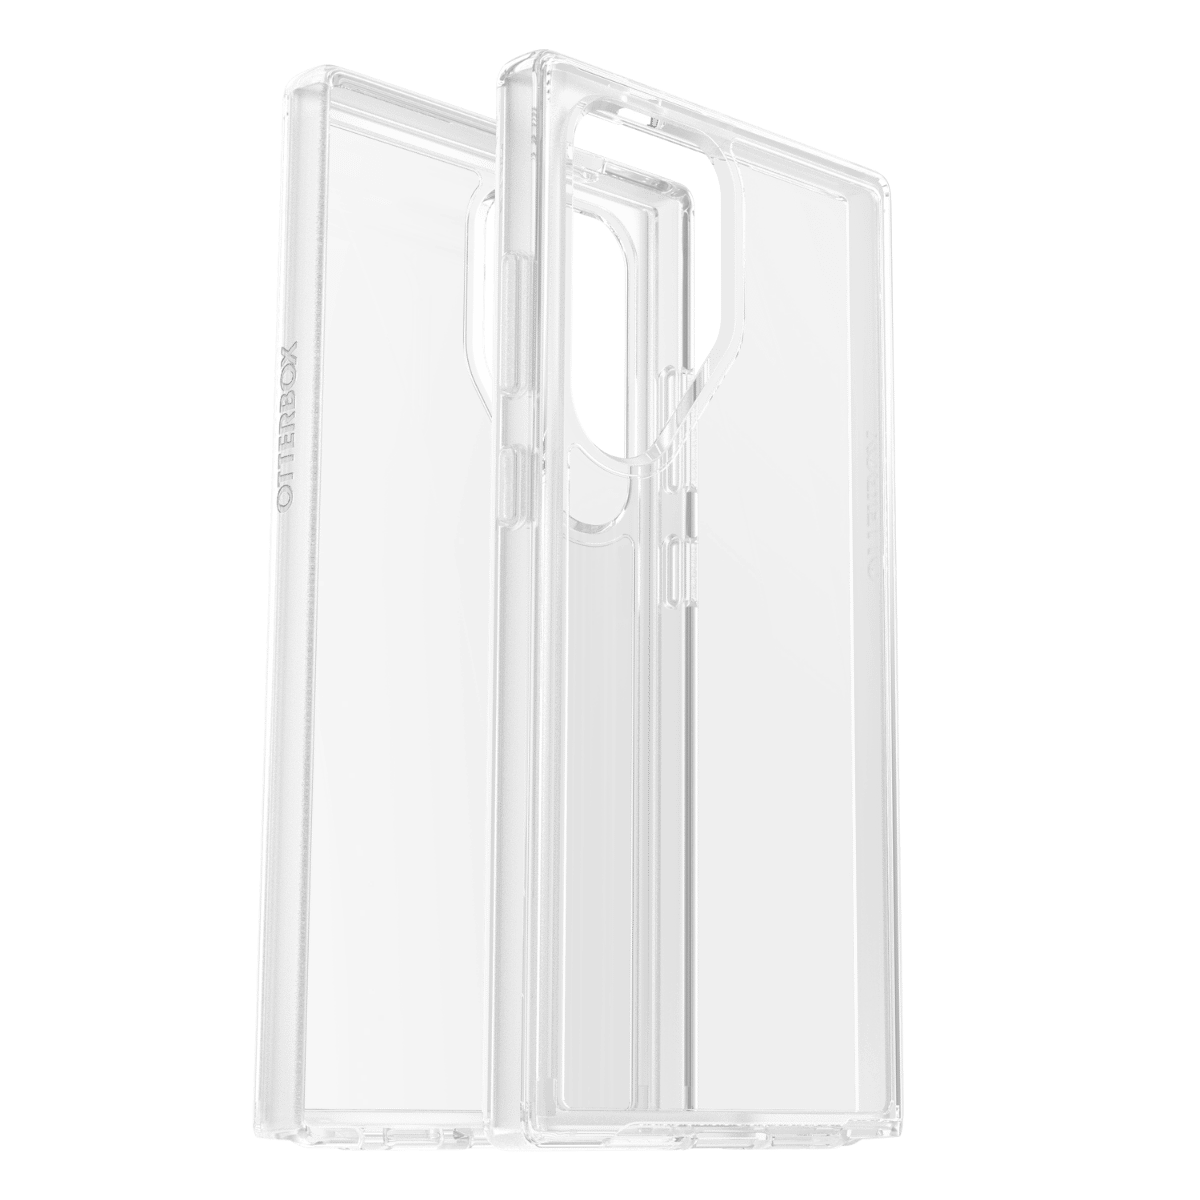 https://www.spark.co.nz/content/dam/spark/images/product-images/accessories/covers-cases/samsung/s-series/s24-series/s24-ultra/otterbox/otterbox-symmetry-s24-ultra-clear-1.png